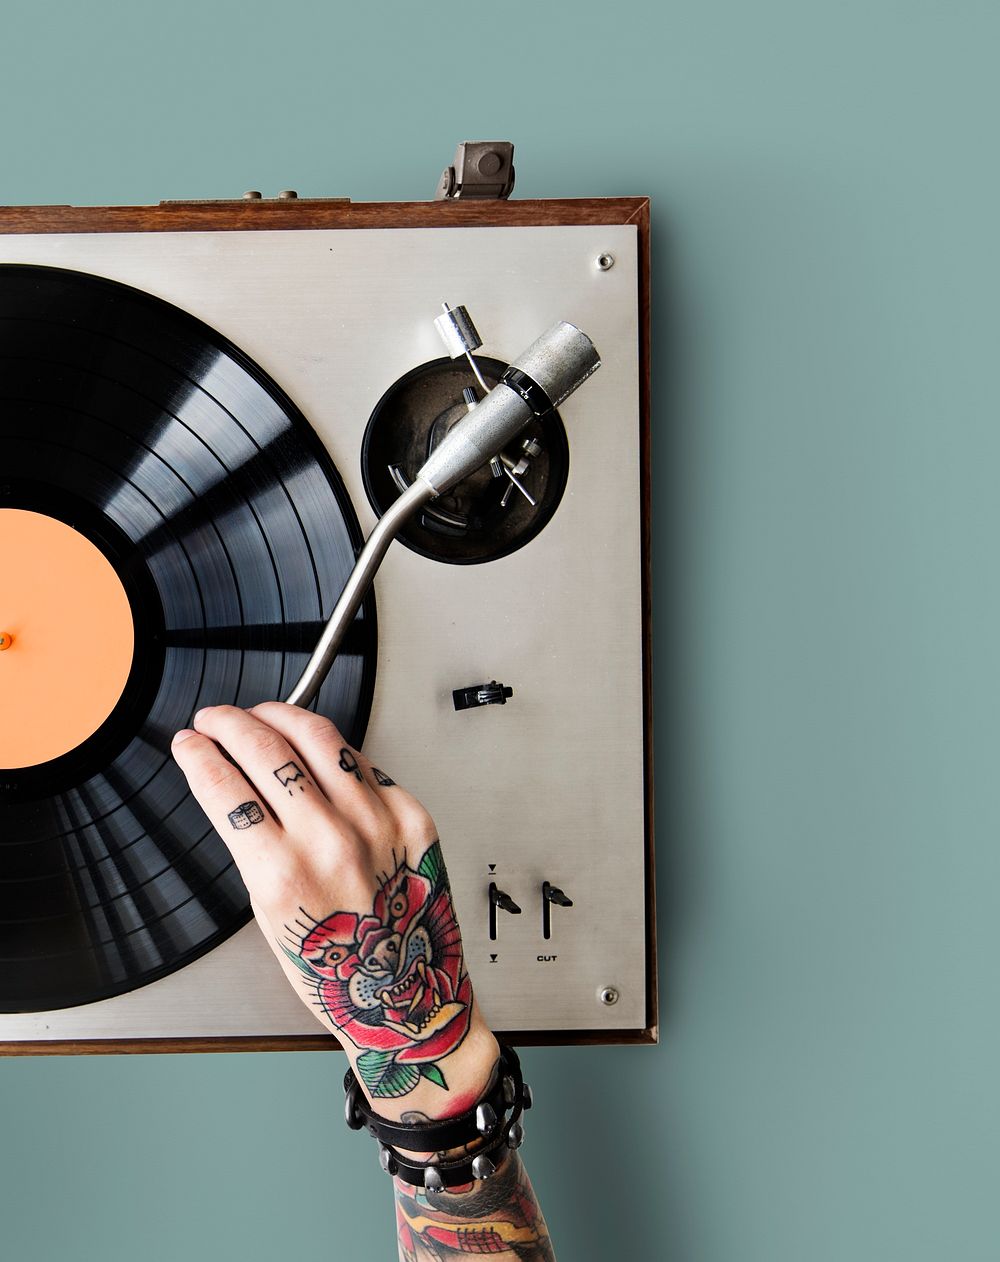 Tattooed woman playing a vinyl record